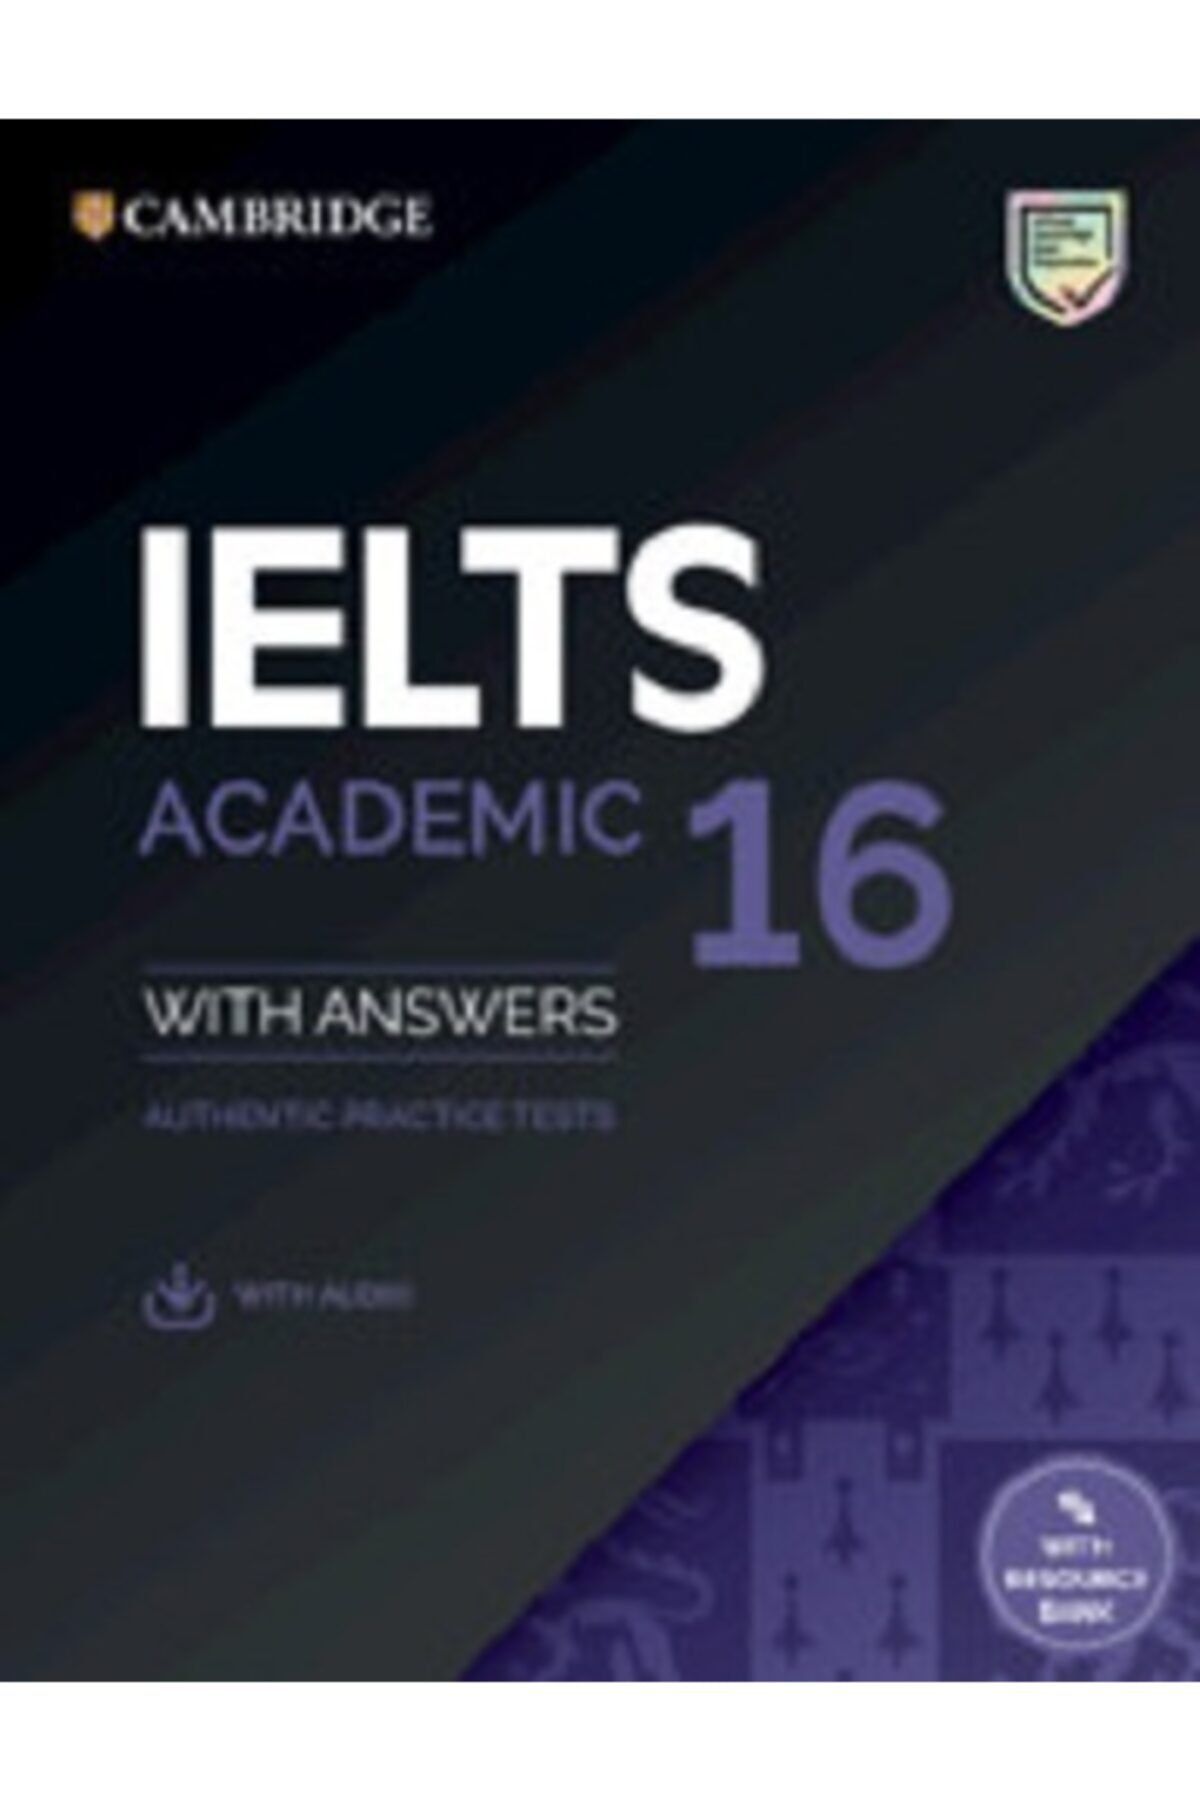 Cambridge University Ielts 16 Academic Student's Book With Answers With Audio